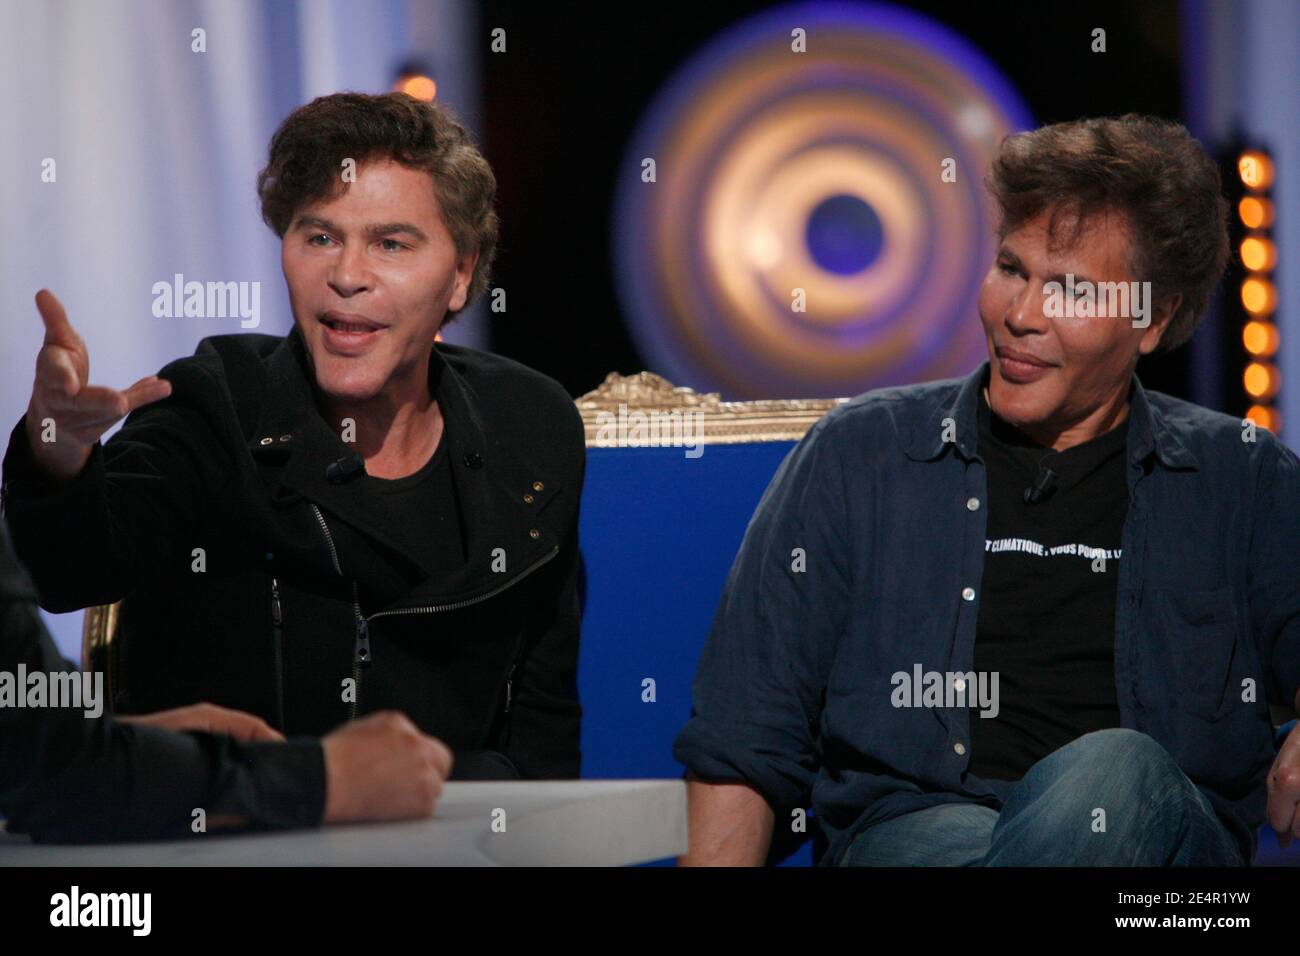 EXCLUSIVE - Grichka Bogdanoff and Igor Bogdanoff attend the taping of a TV show in Paris, France on February 25, 2008. Photo by Greg Soussan/ABACAPRESS.COM Stock Photo